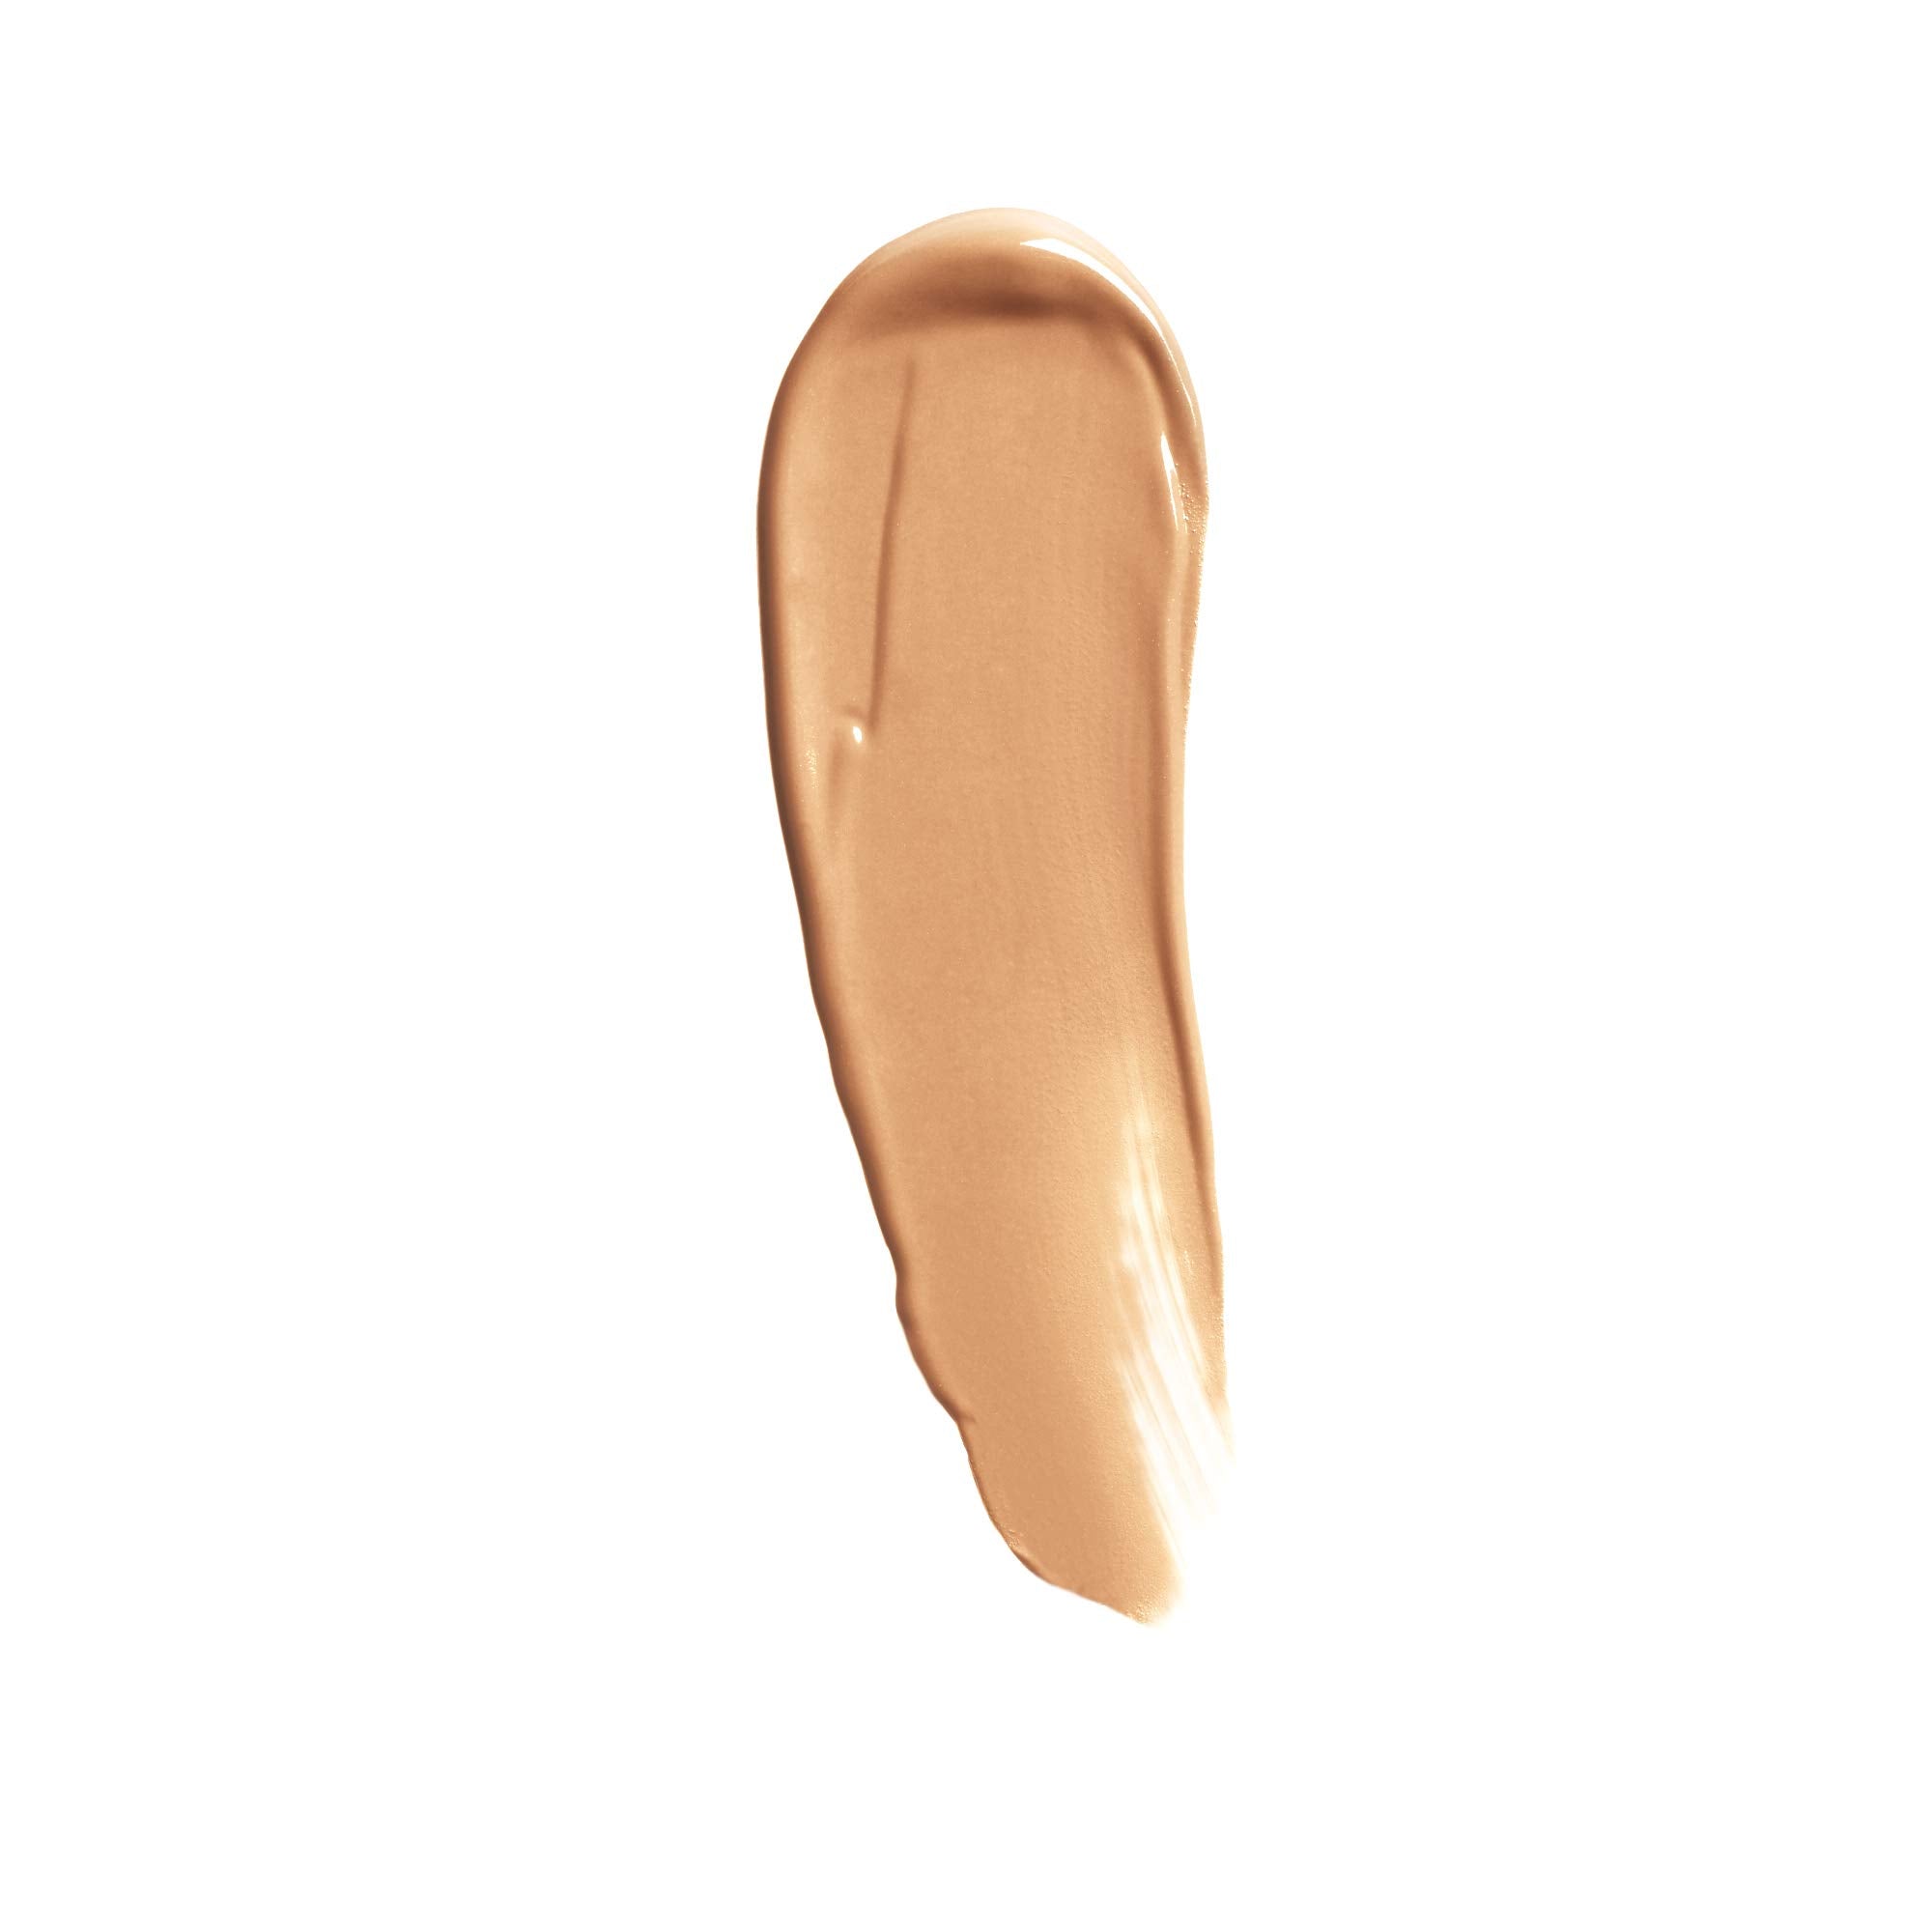 COVERGIRL Outlast Extreme Wear Concealer